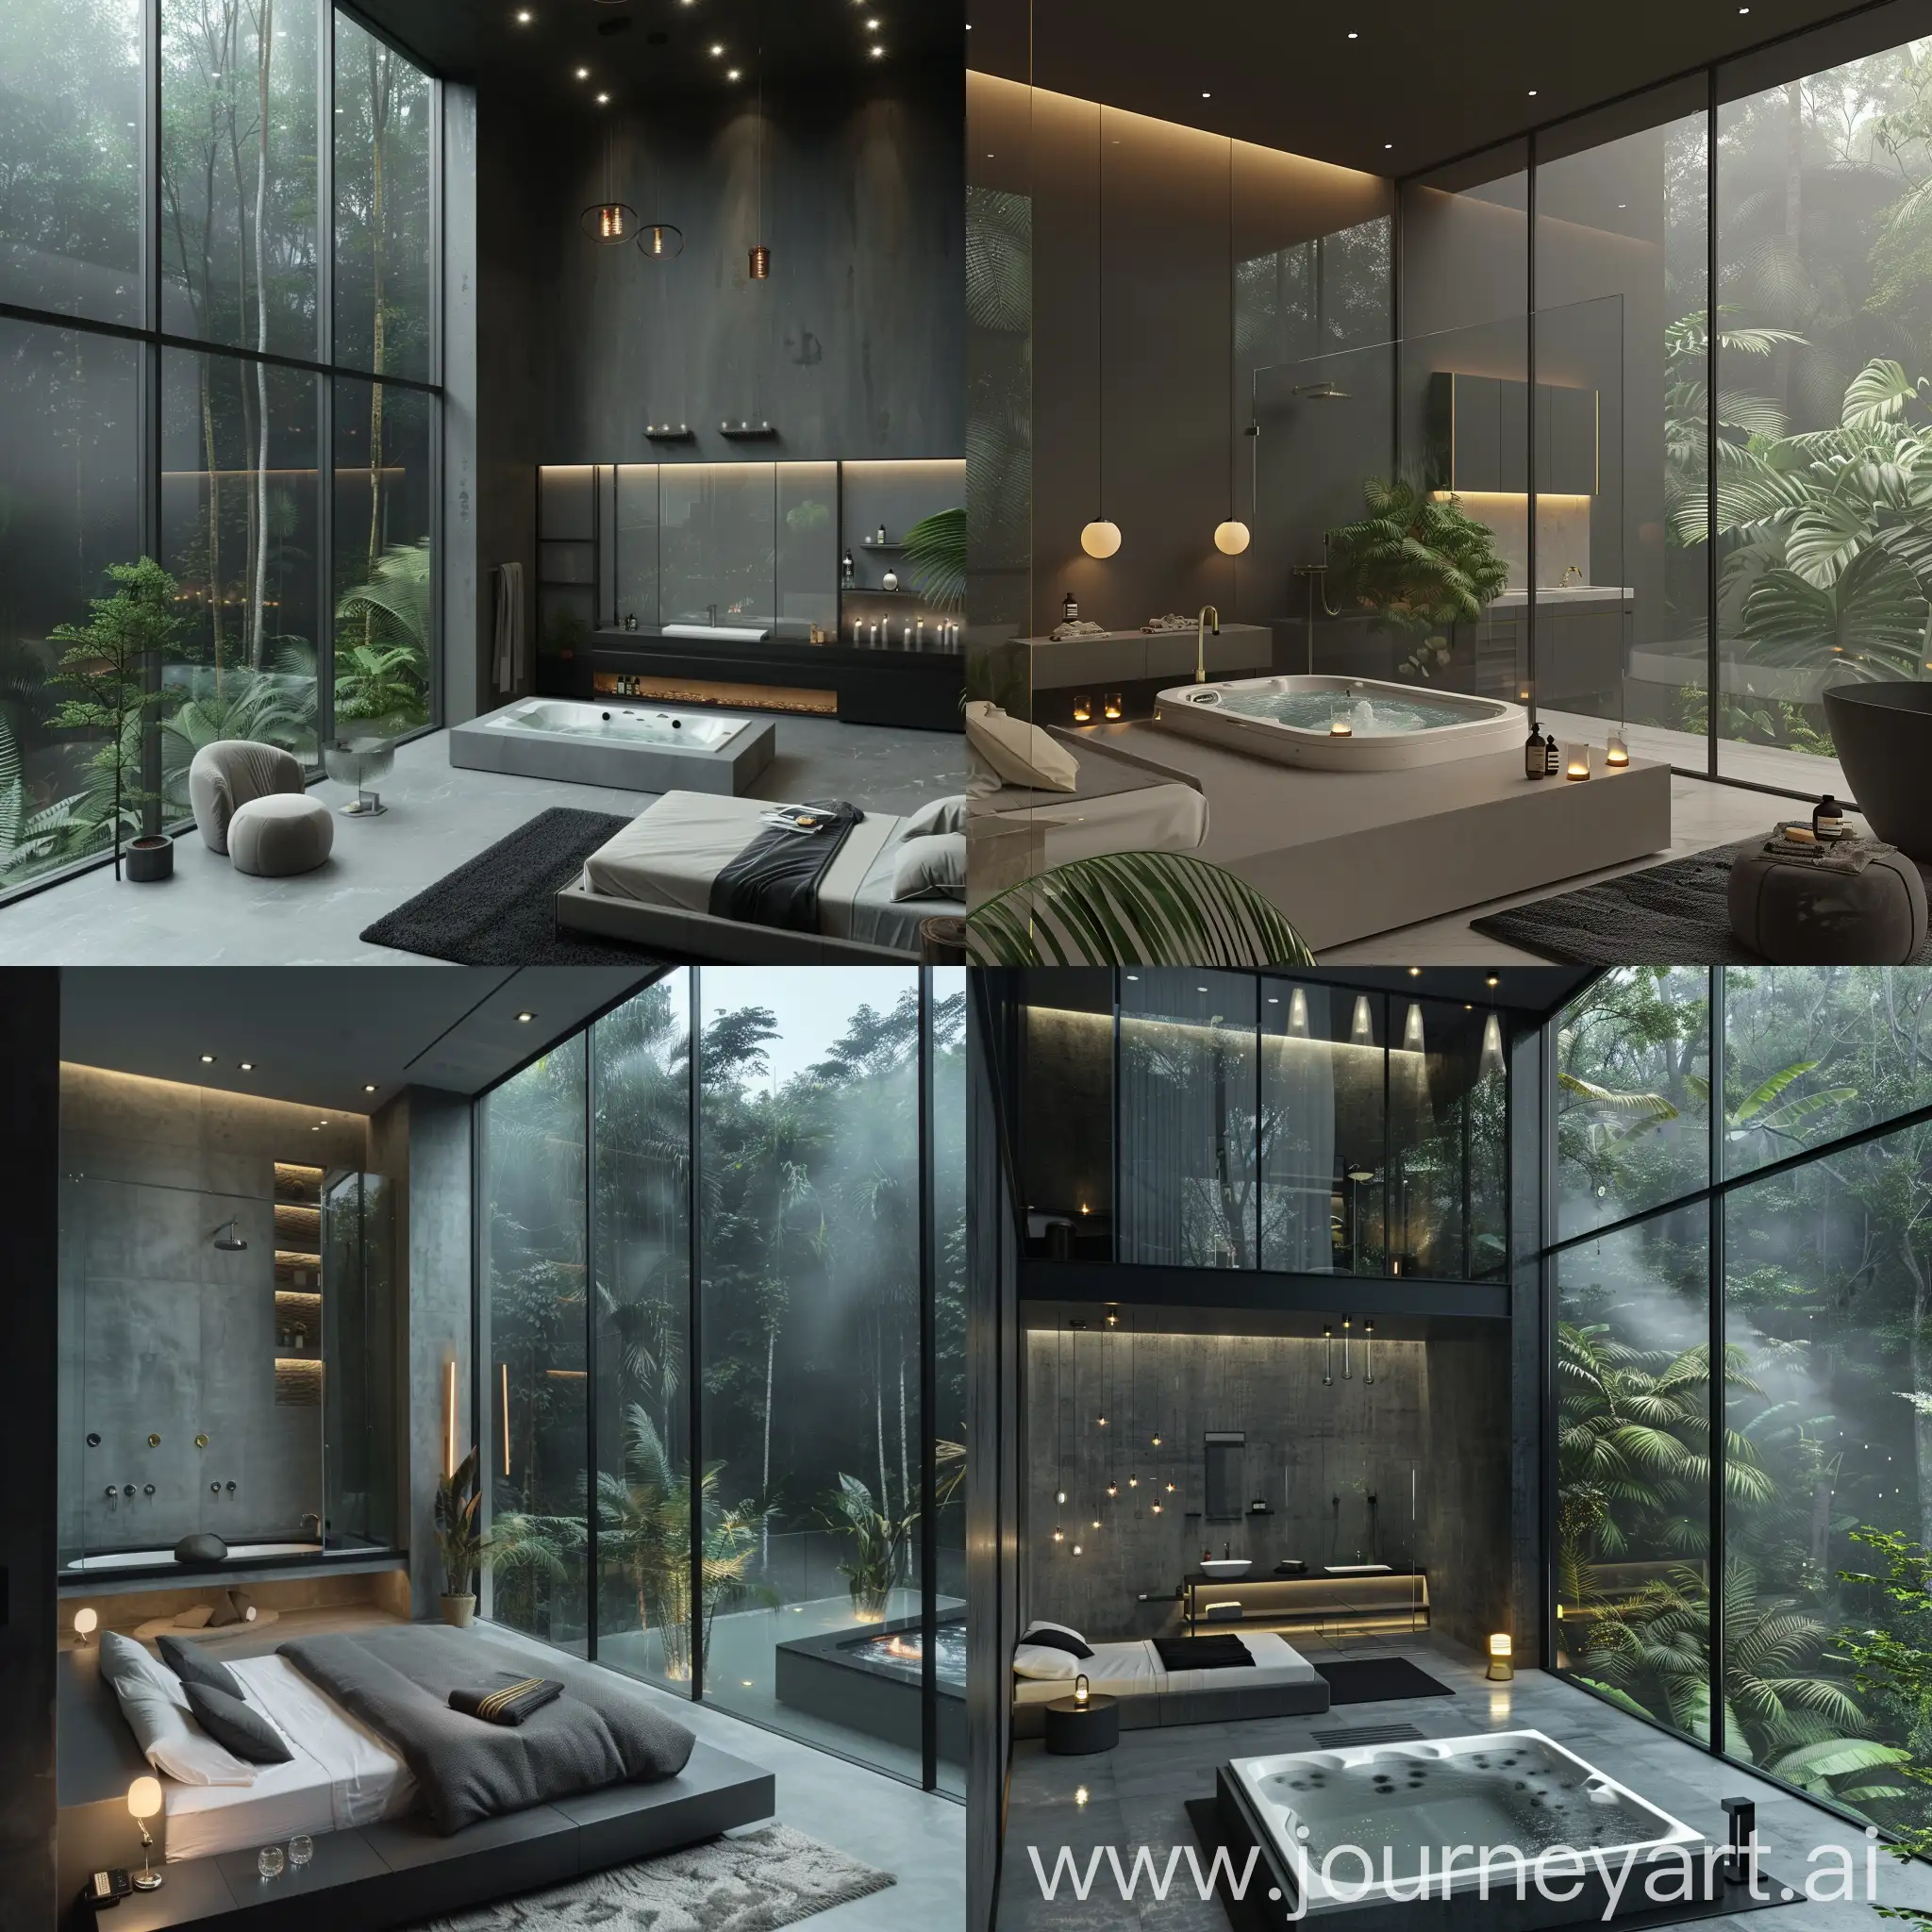 A modern minimalist gray black cream bedroom with modern decorations and soft lighting, glass bathroom and Jacuzzi, a tall window wall, in a misty tropical forest, real photo